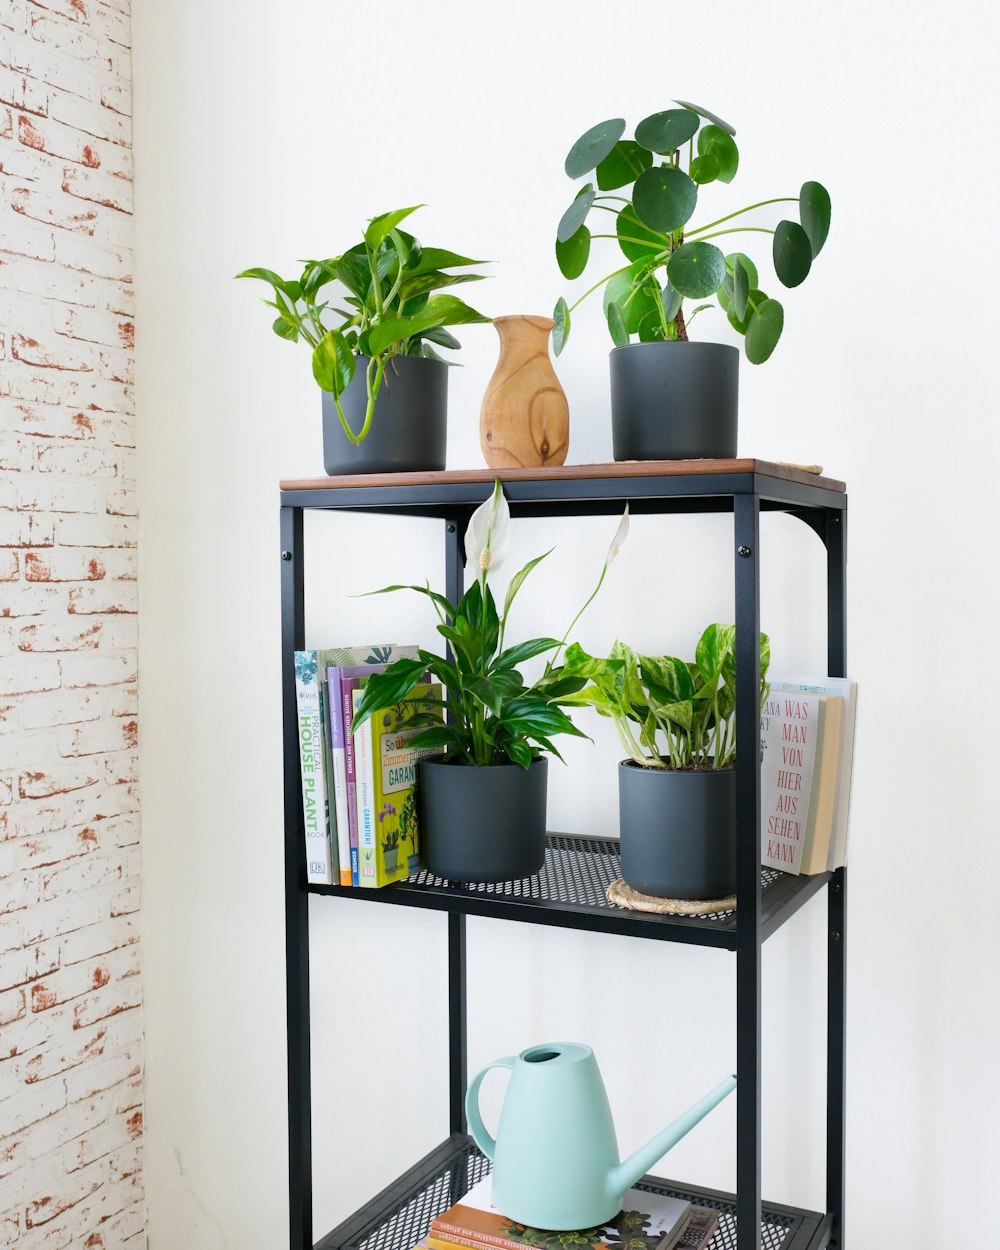 a shelf filled with potted plants next to a brick wall